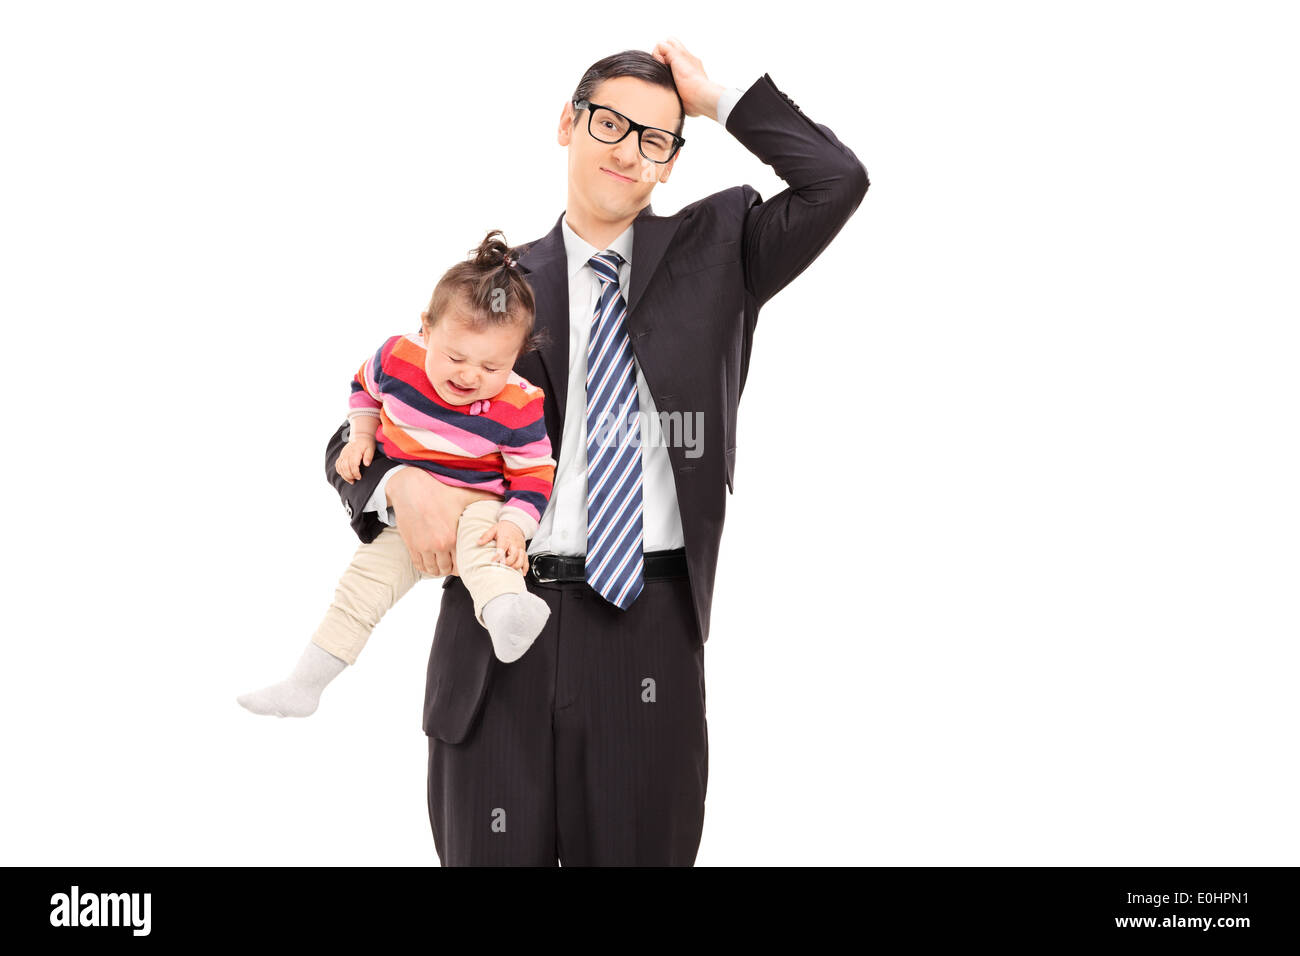 Confused businessman holding a crying baby Stock Photo